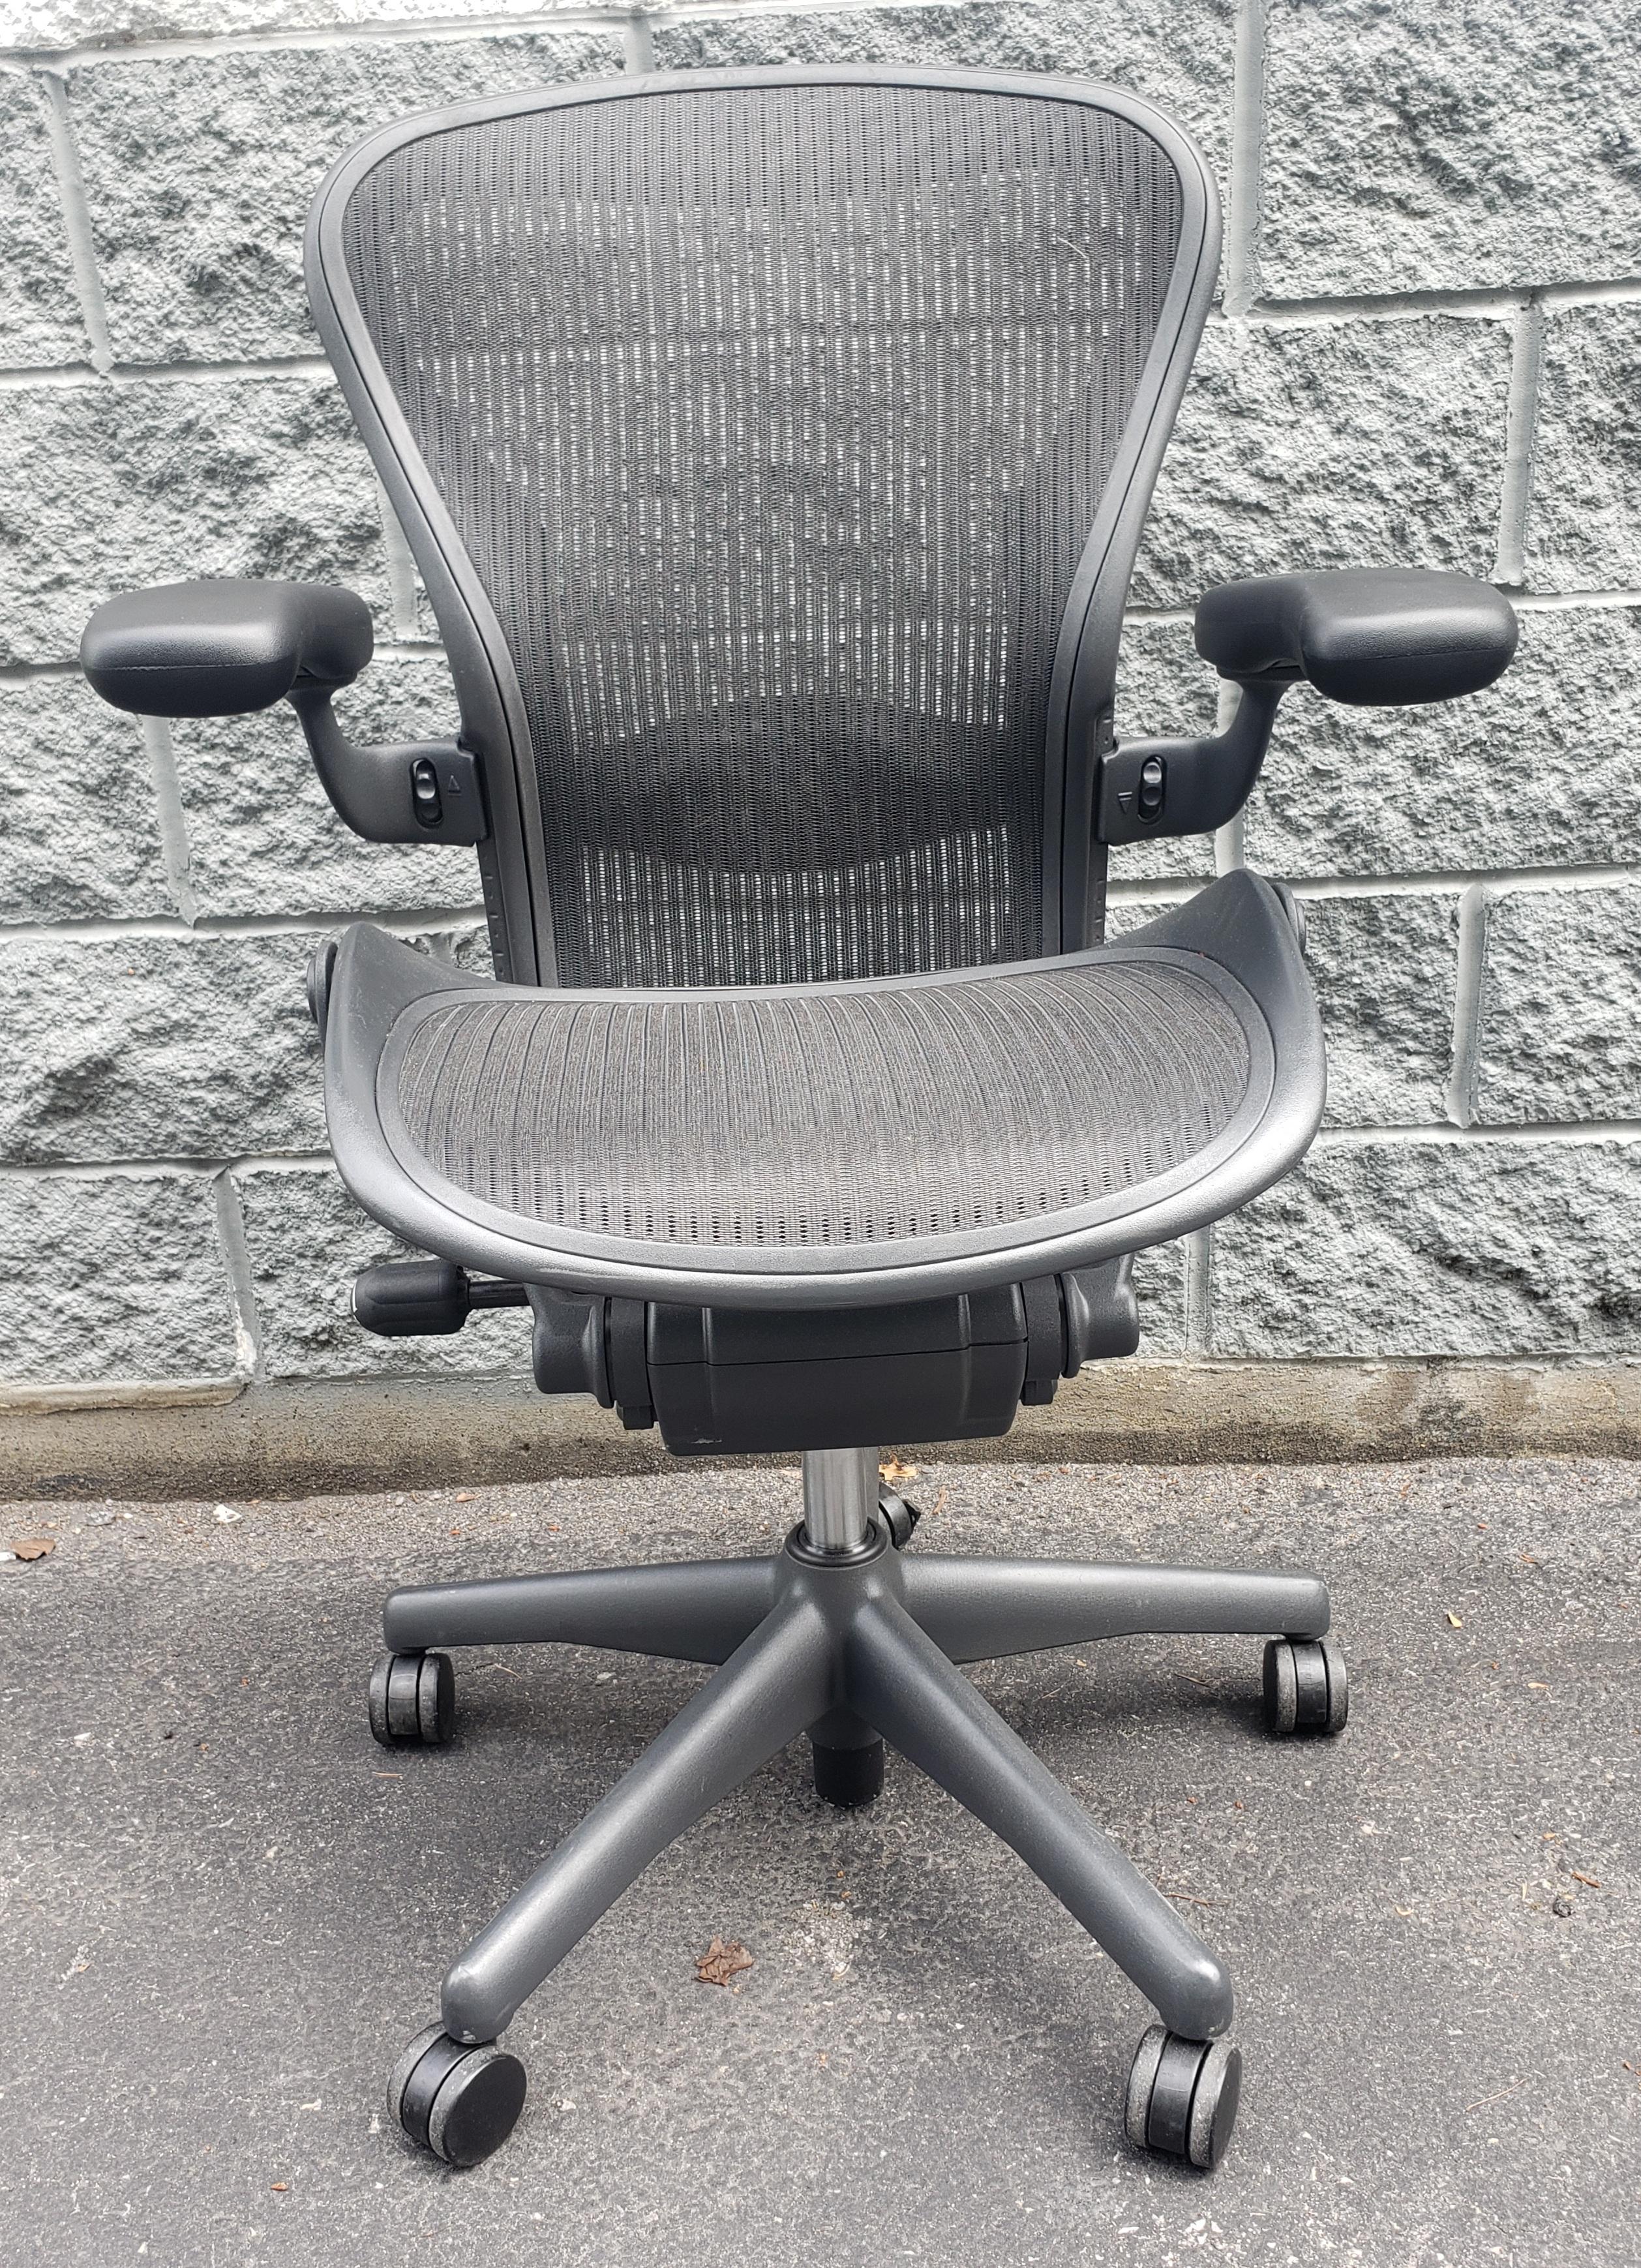 The original Herman Miller Classic Aeron Chair Fully Adjustable in great vintage condition.
Measures 24 to 30